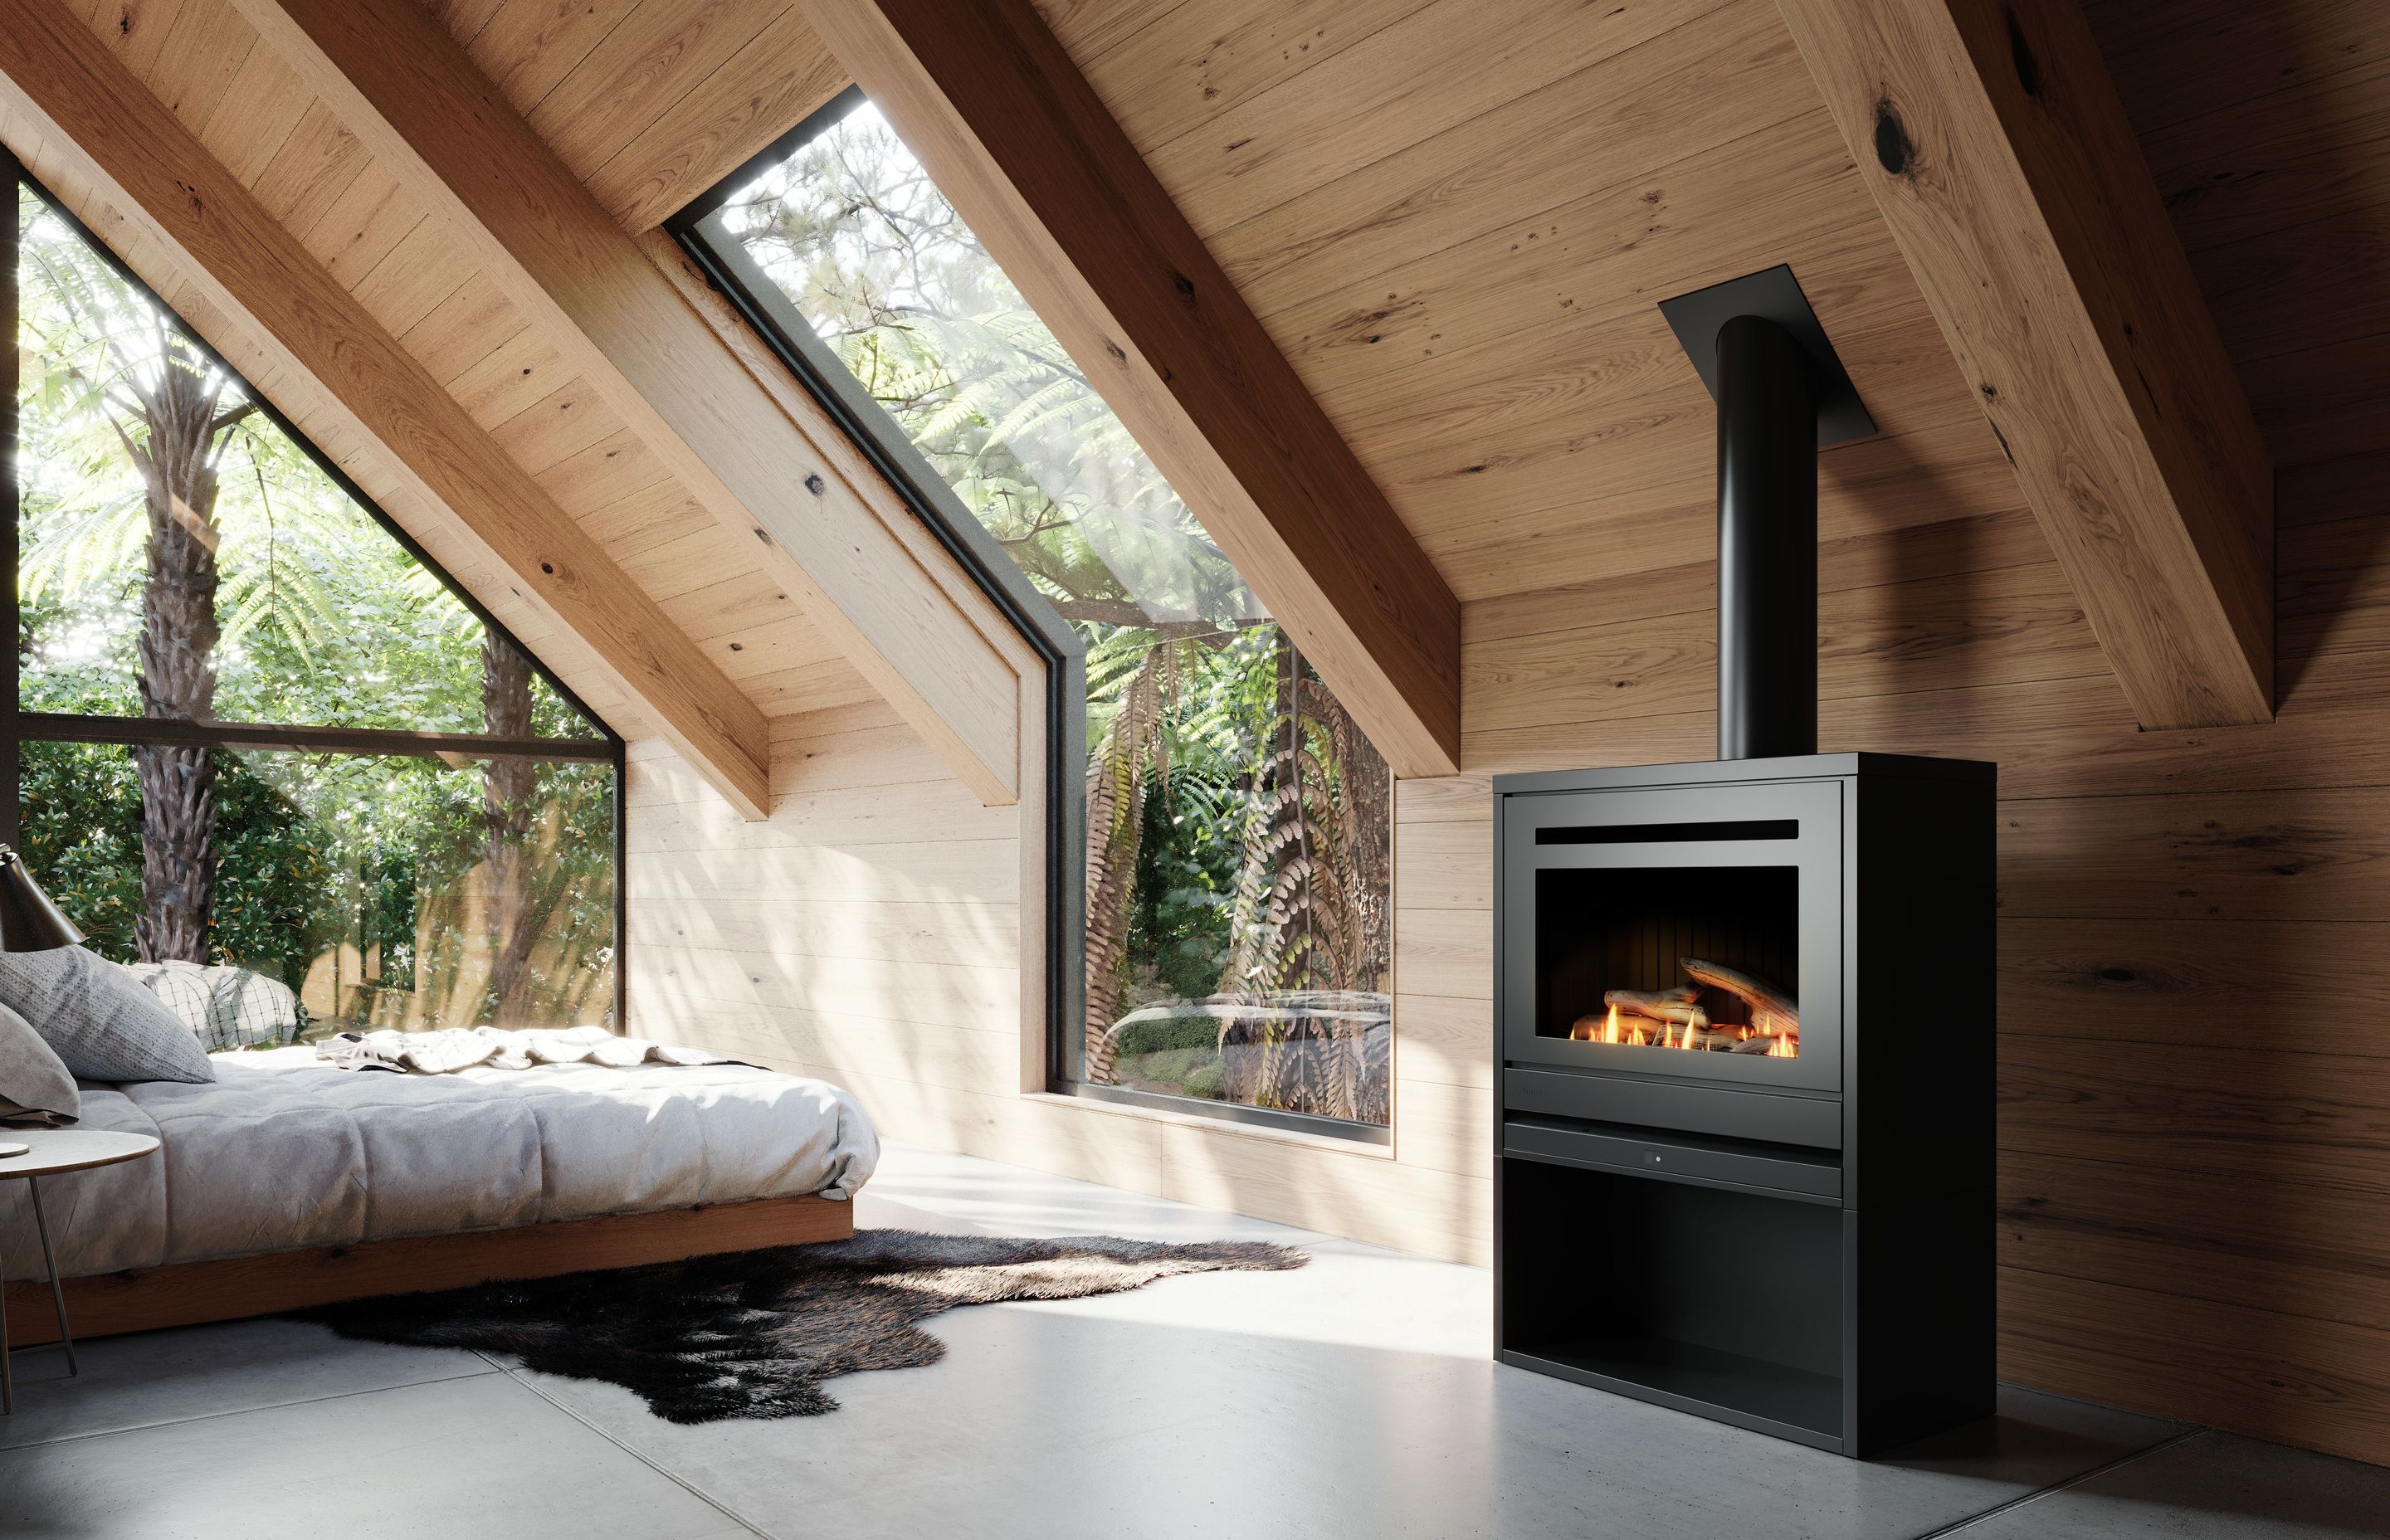 The fireplaces are Wi-Fi enabled, so they can be controlled from anywhere.